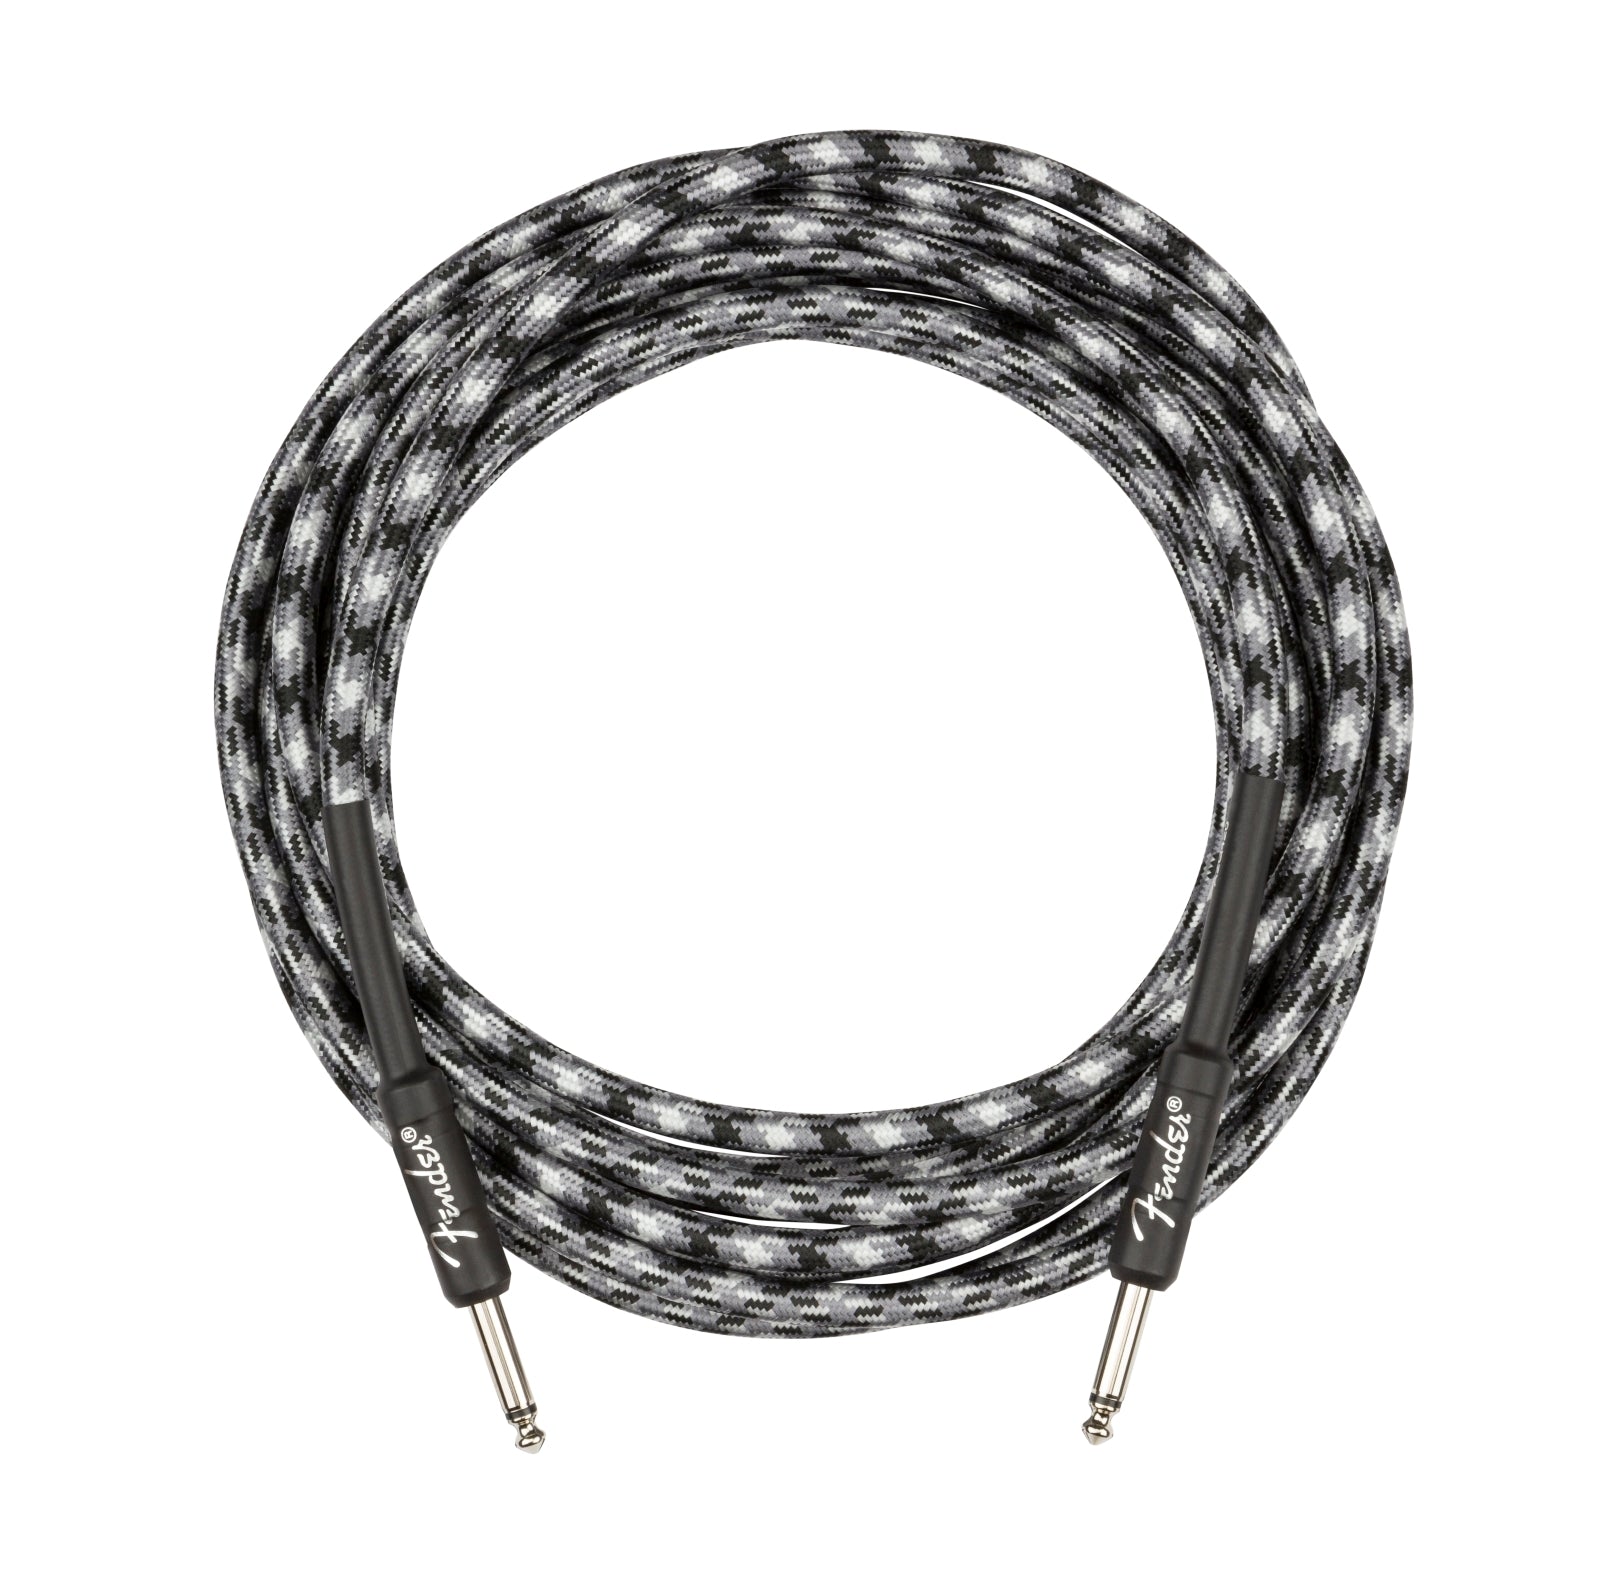 Fender Professional Series 18.6' Instrument Cable - Winter Camo